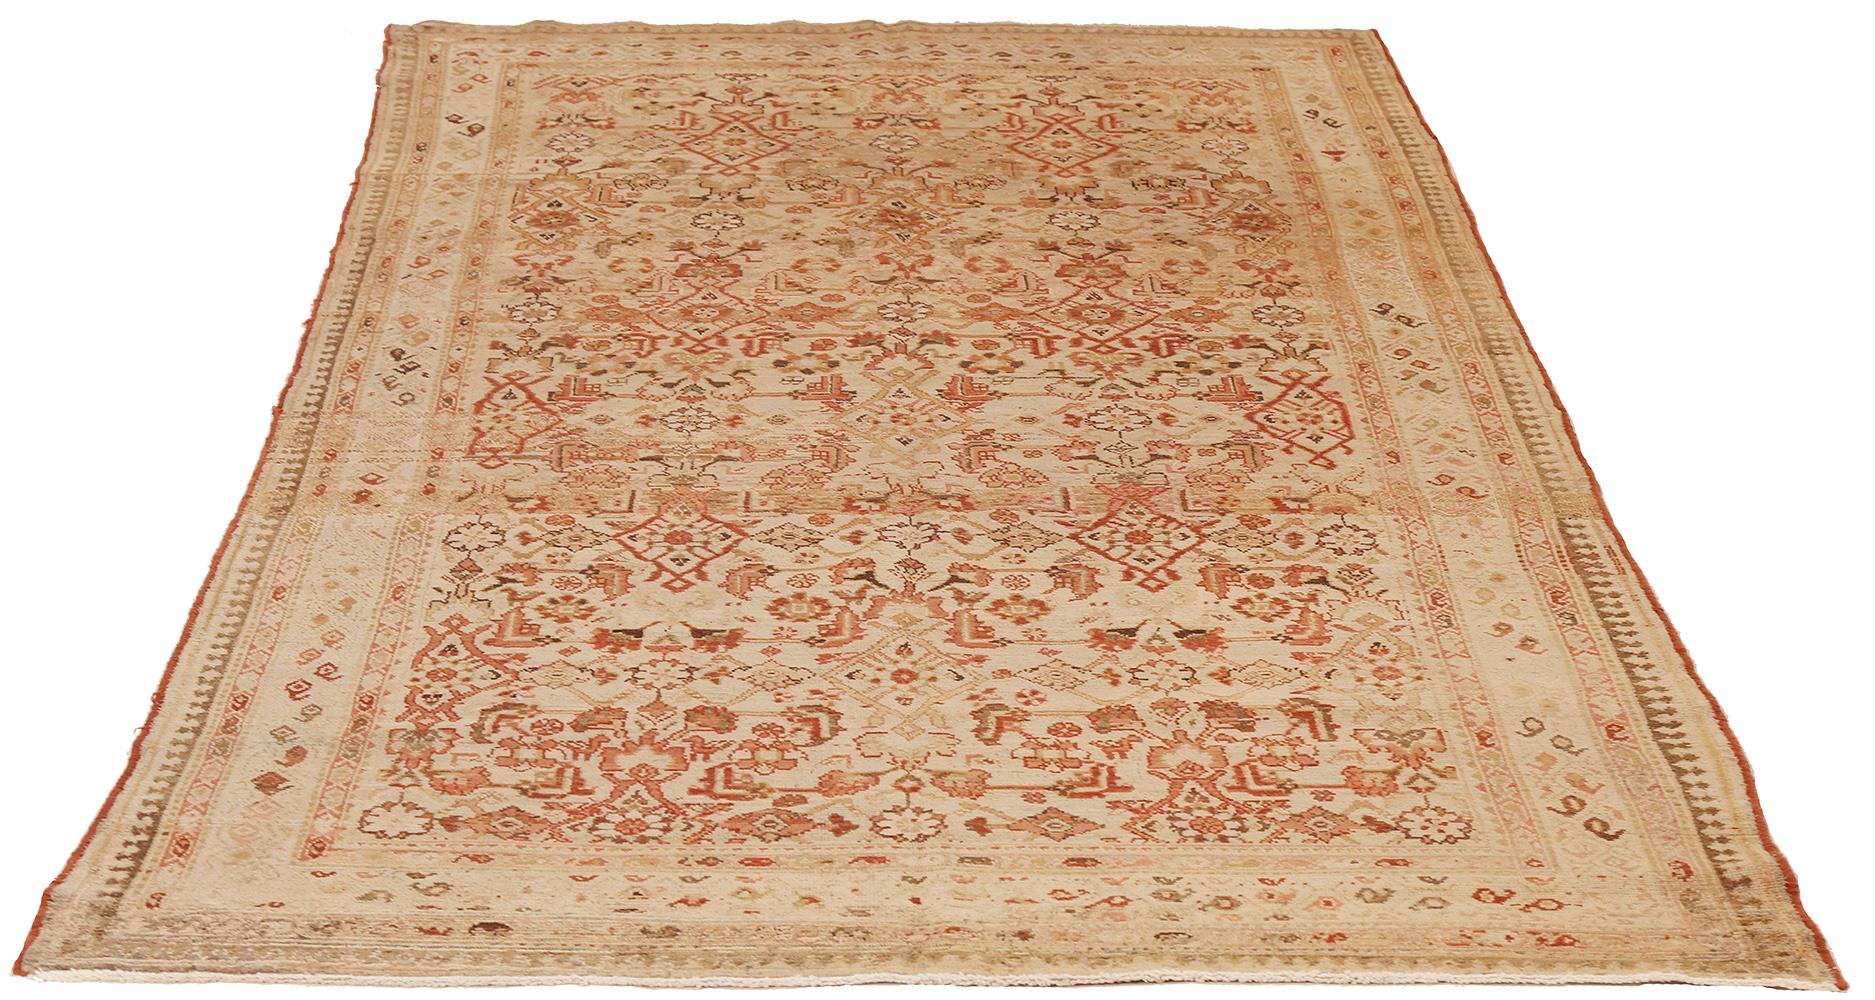 Antique Persian runner rug handwoven from the finest sheep’s wool and colored with all-natural vegetable dyes that are safe for humans and pets. It’s a traditional Malayer design featuring red and beige floral details over an ivory field. It’s a